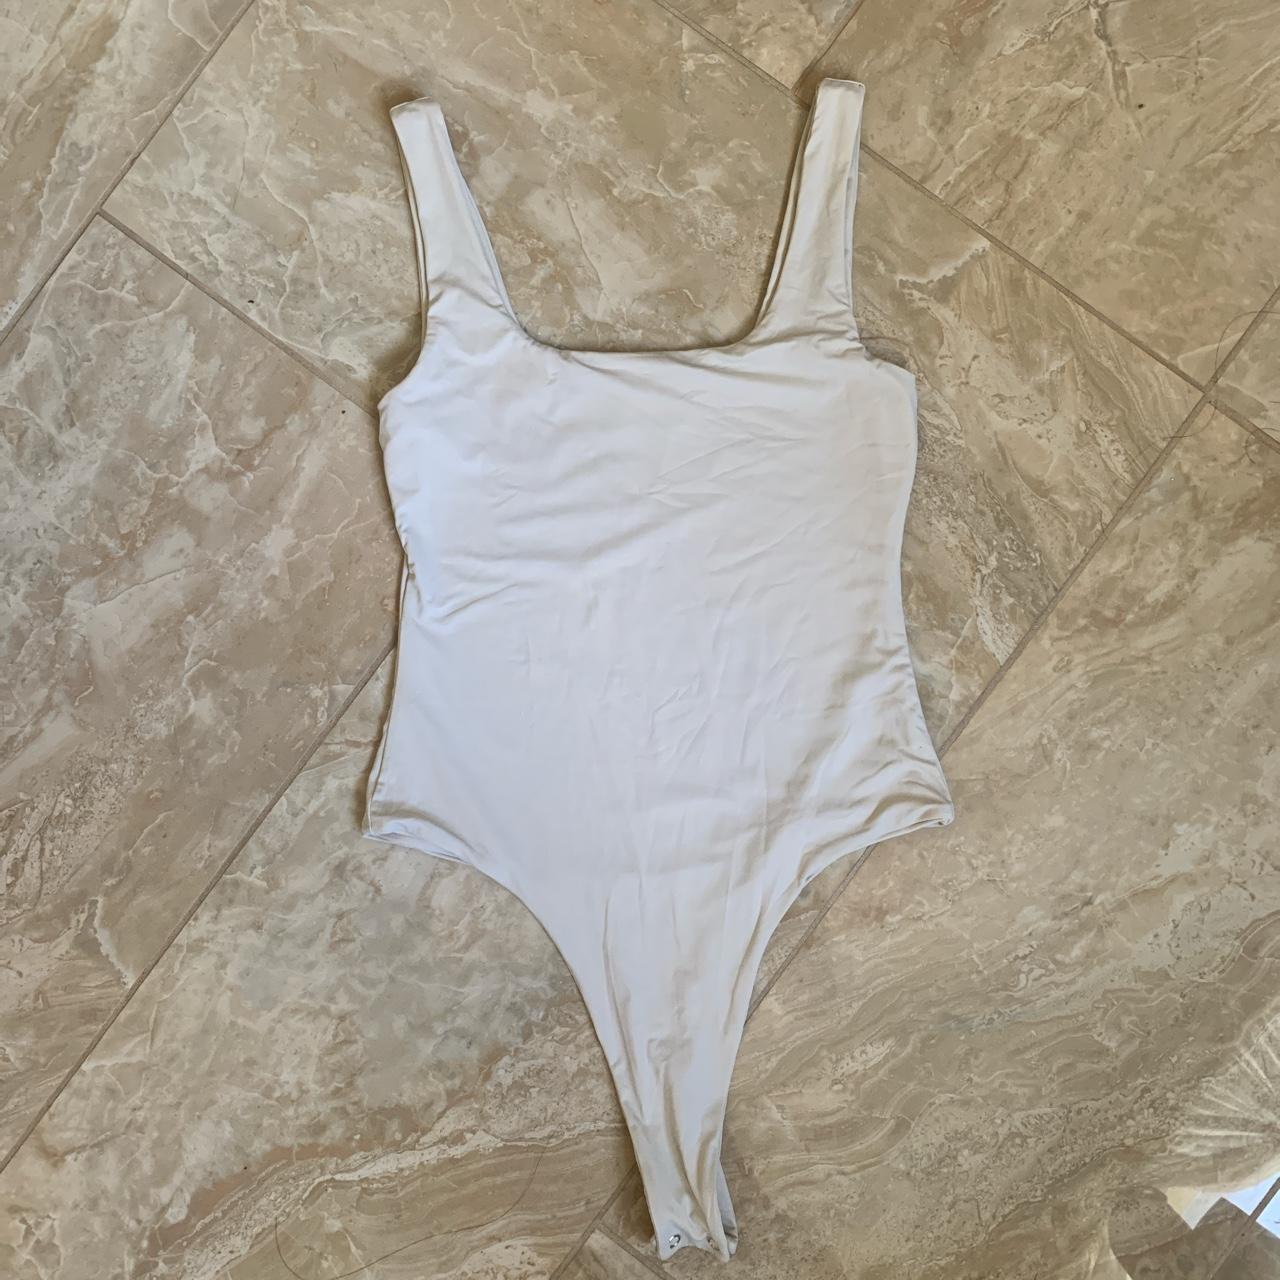 ardene white bodysuit a size small and a size - Depop